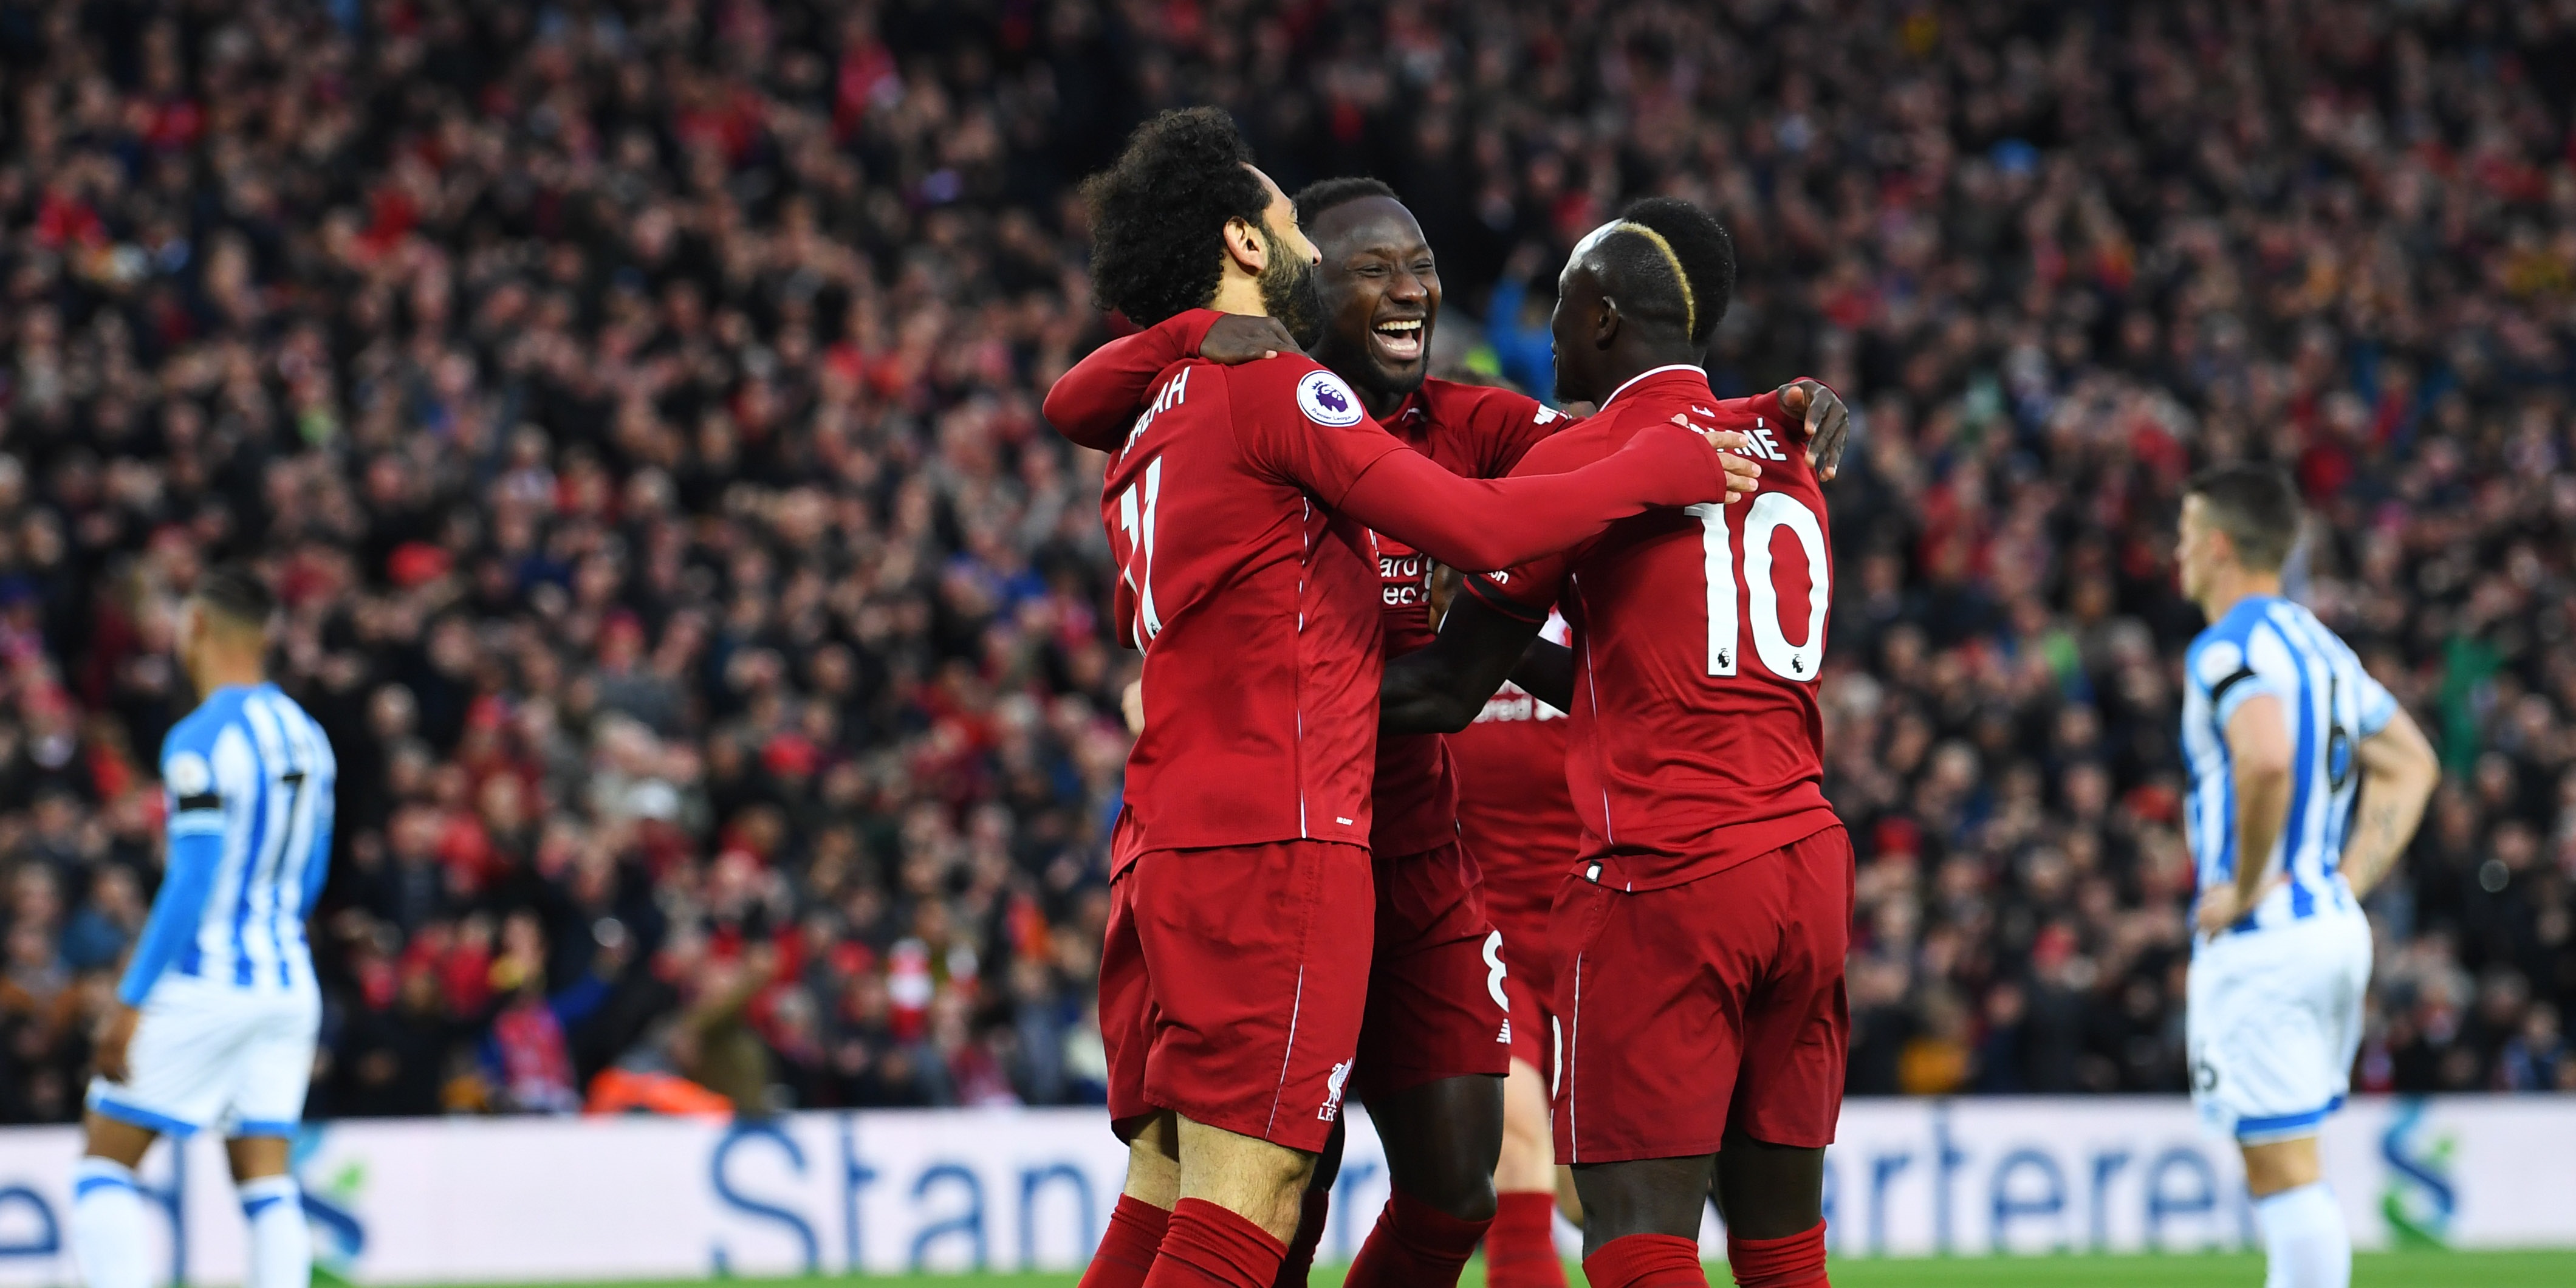 Liverpool will be able to field Salah, Mane & Keita v Chelsea in huge AFCON boost